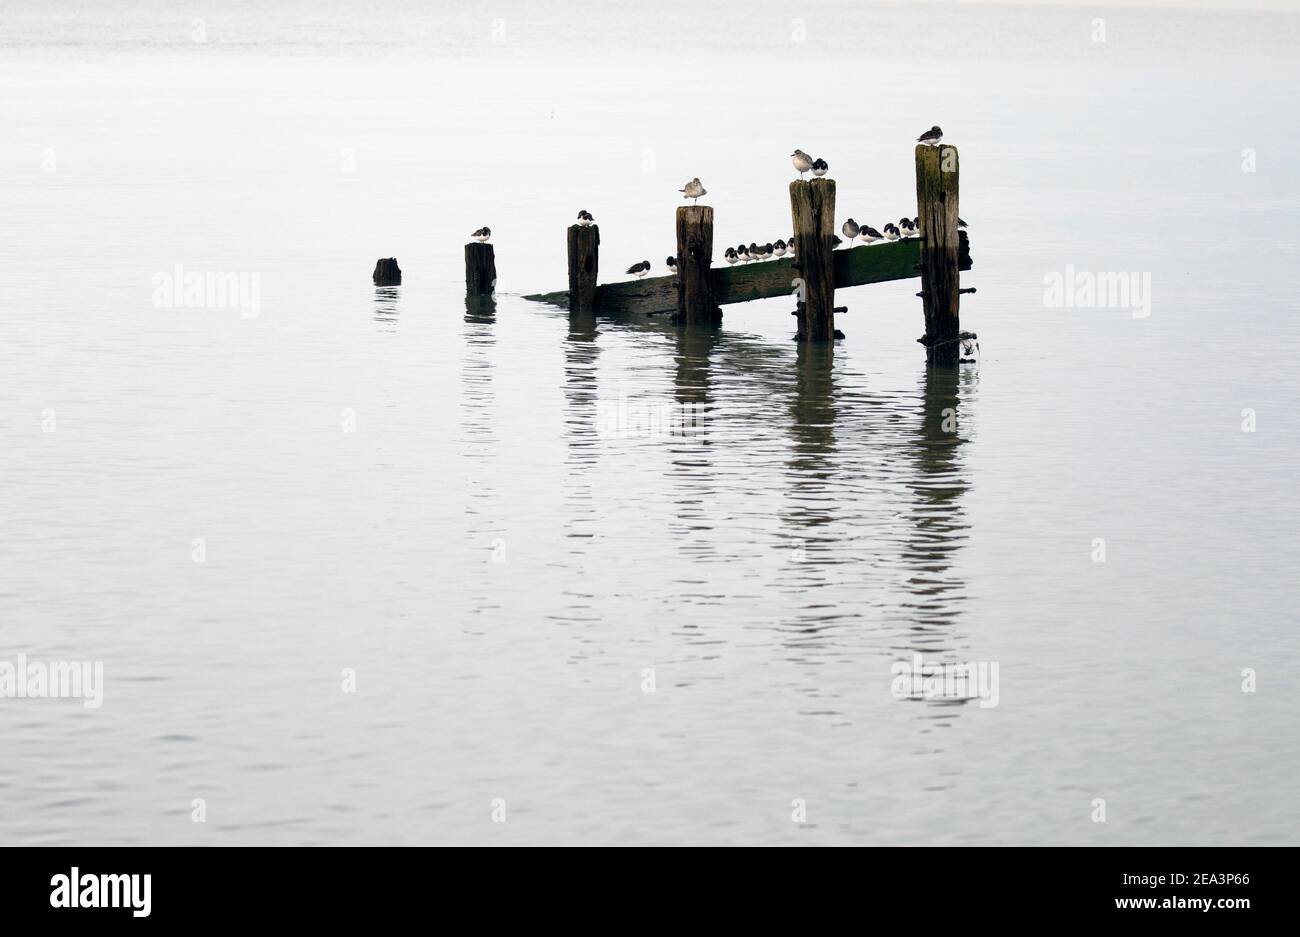 Turnstones, grey plovers and a redshank perched on the remains of old groynes reflected in calm water. Stock Photo